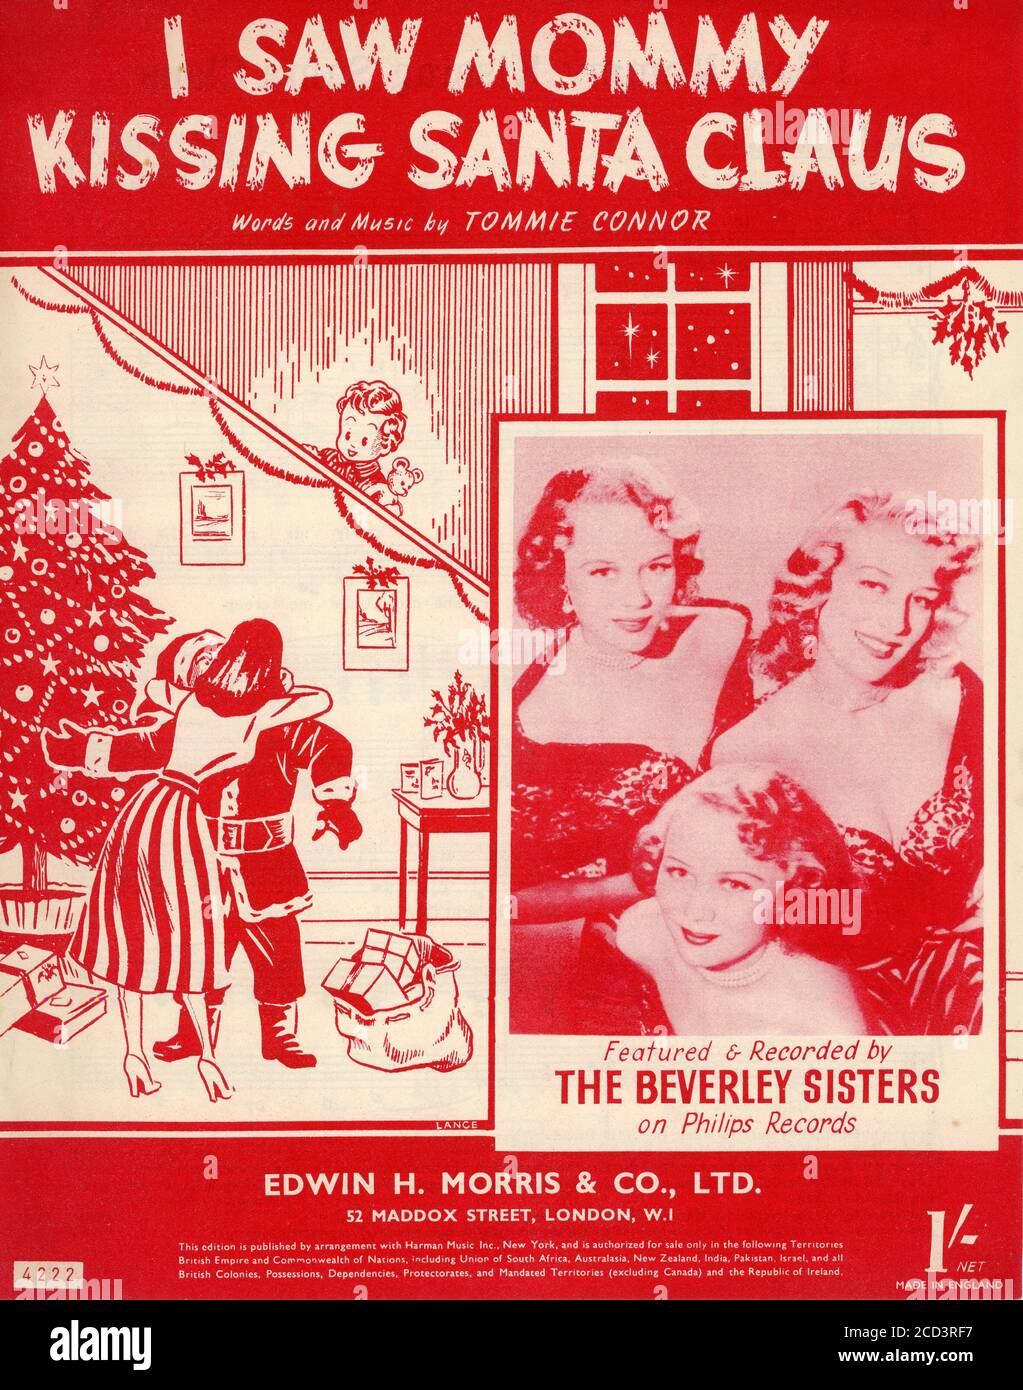 Sheet Music - I Saw Mommy Kissing Santa Claus - The Beverley Sisters - 1952 Stock Photo